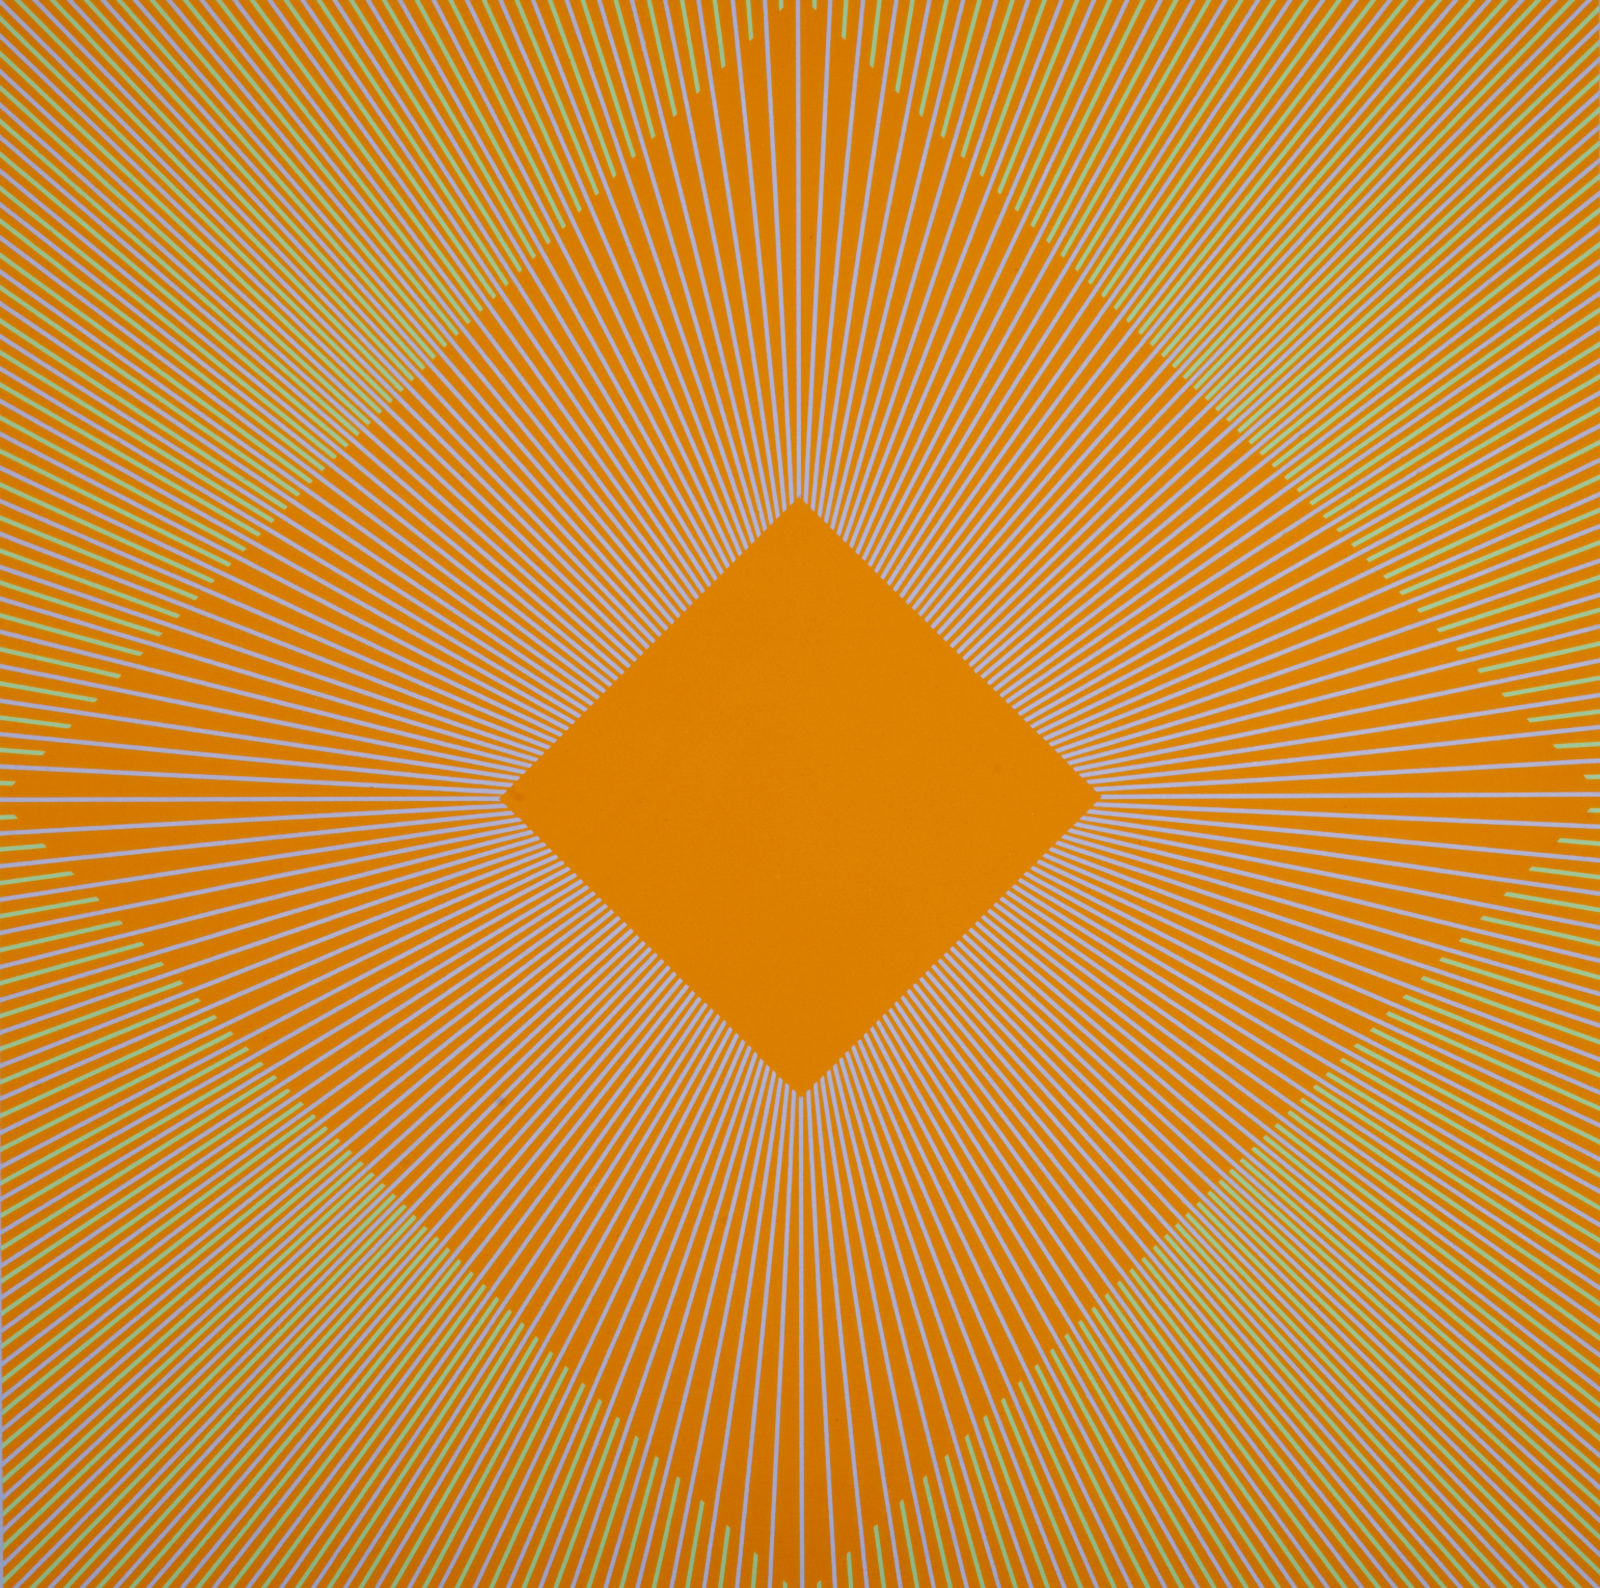 A yellow and orange abstract painting with geometric shapes.